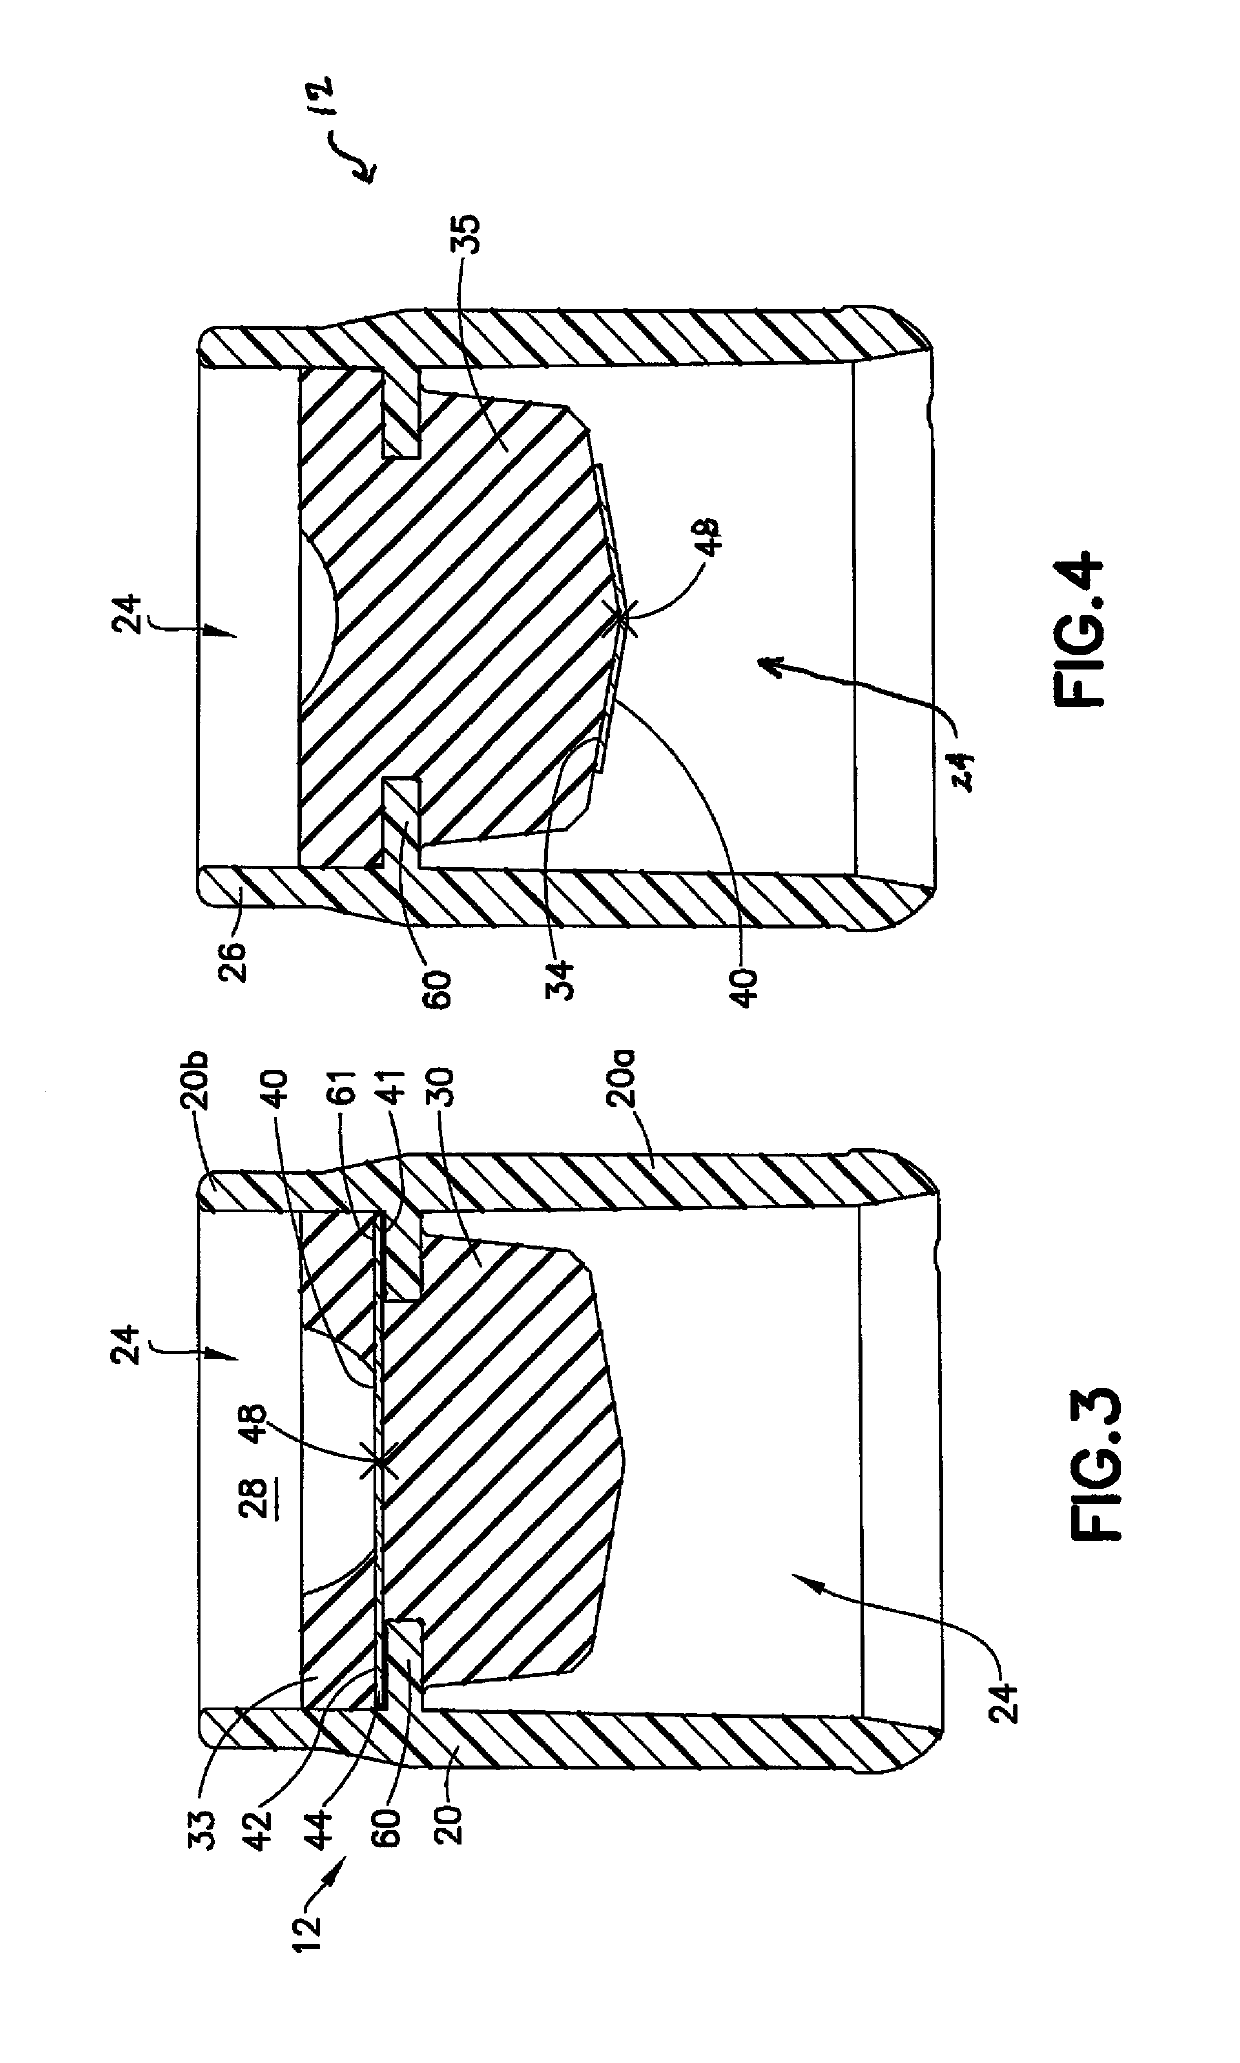 One-piece safety tube closure with film element